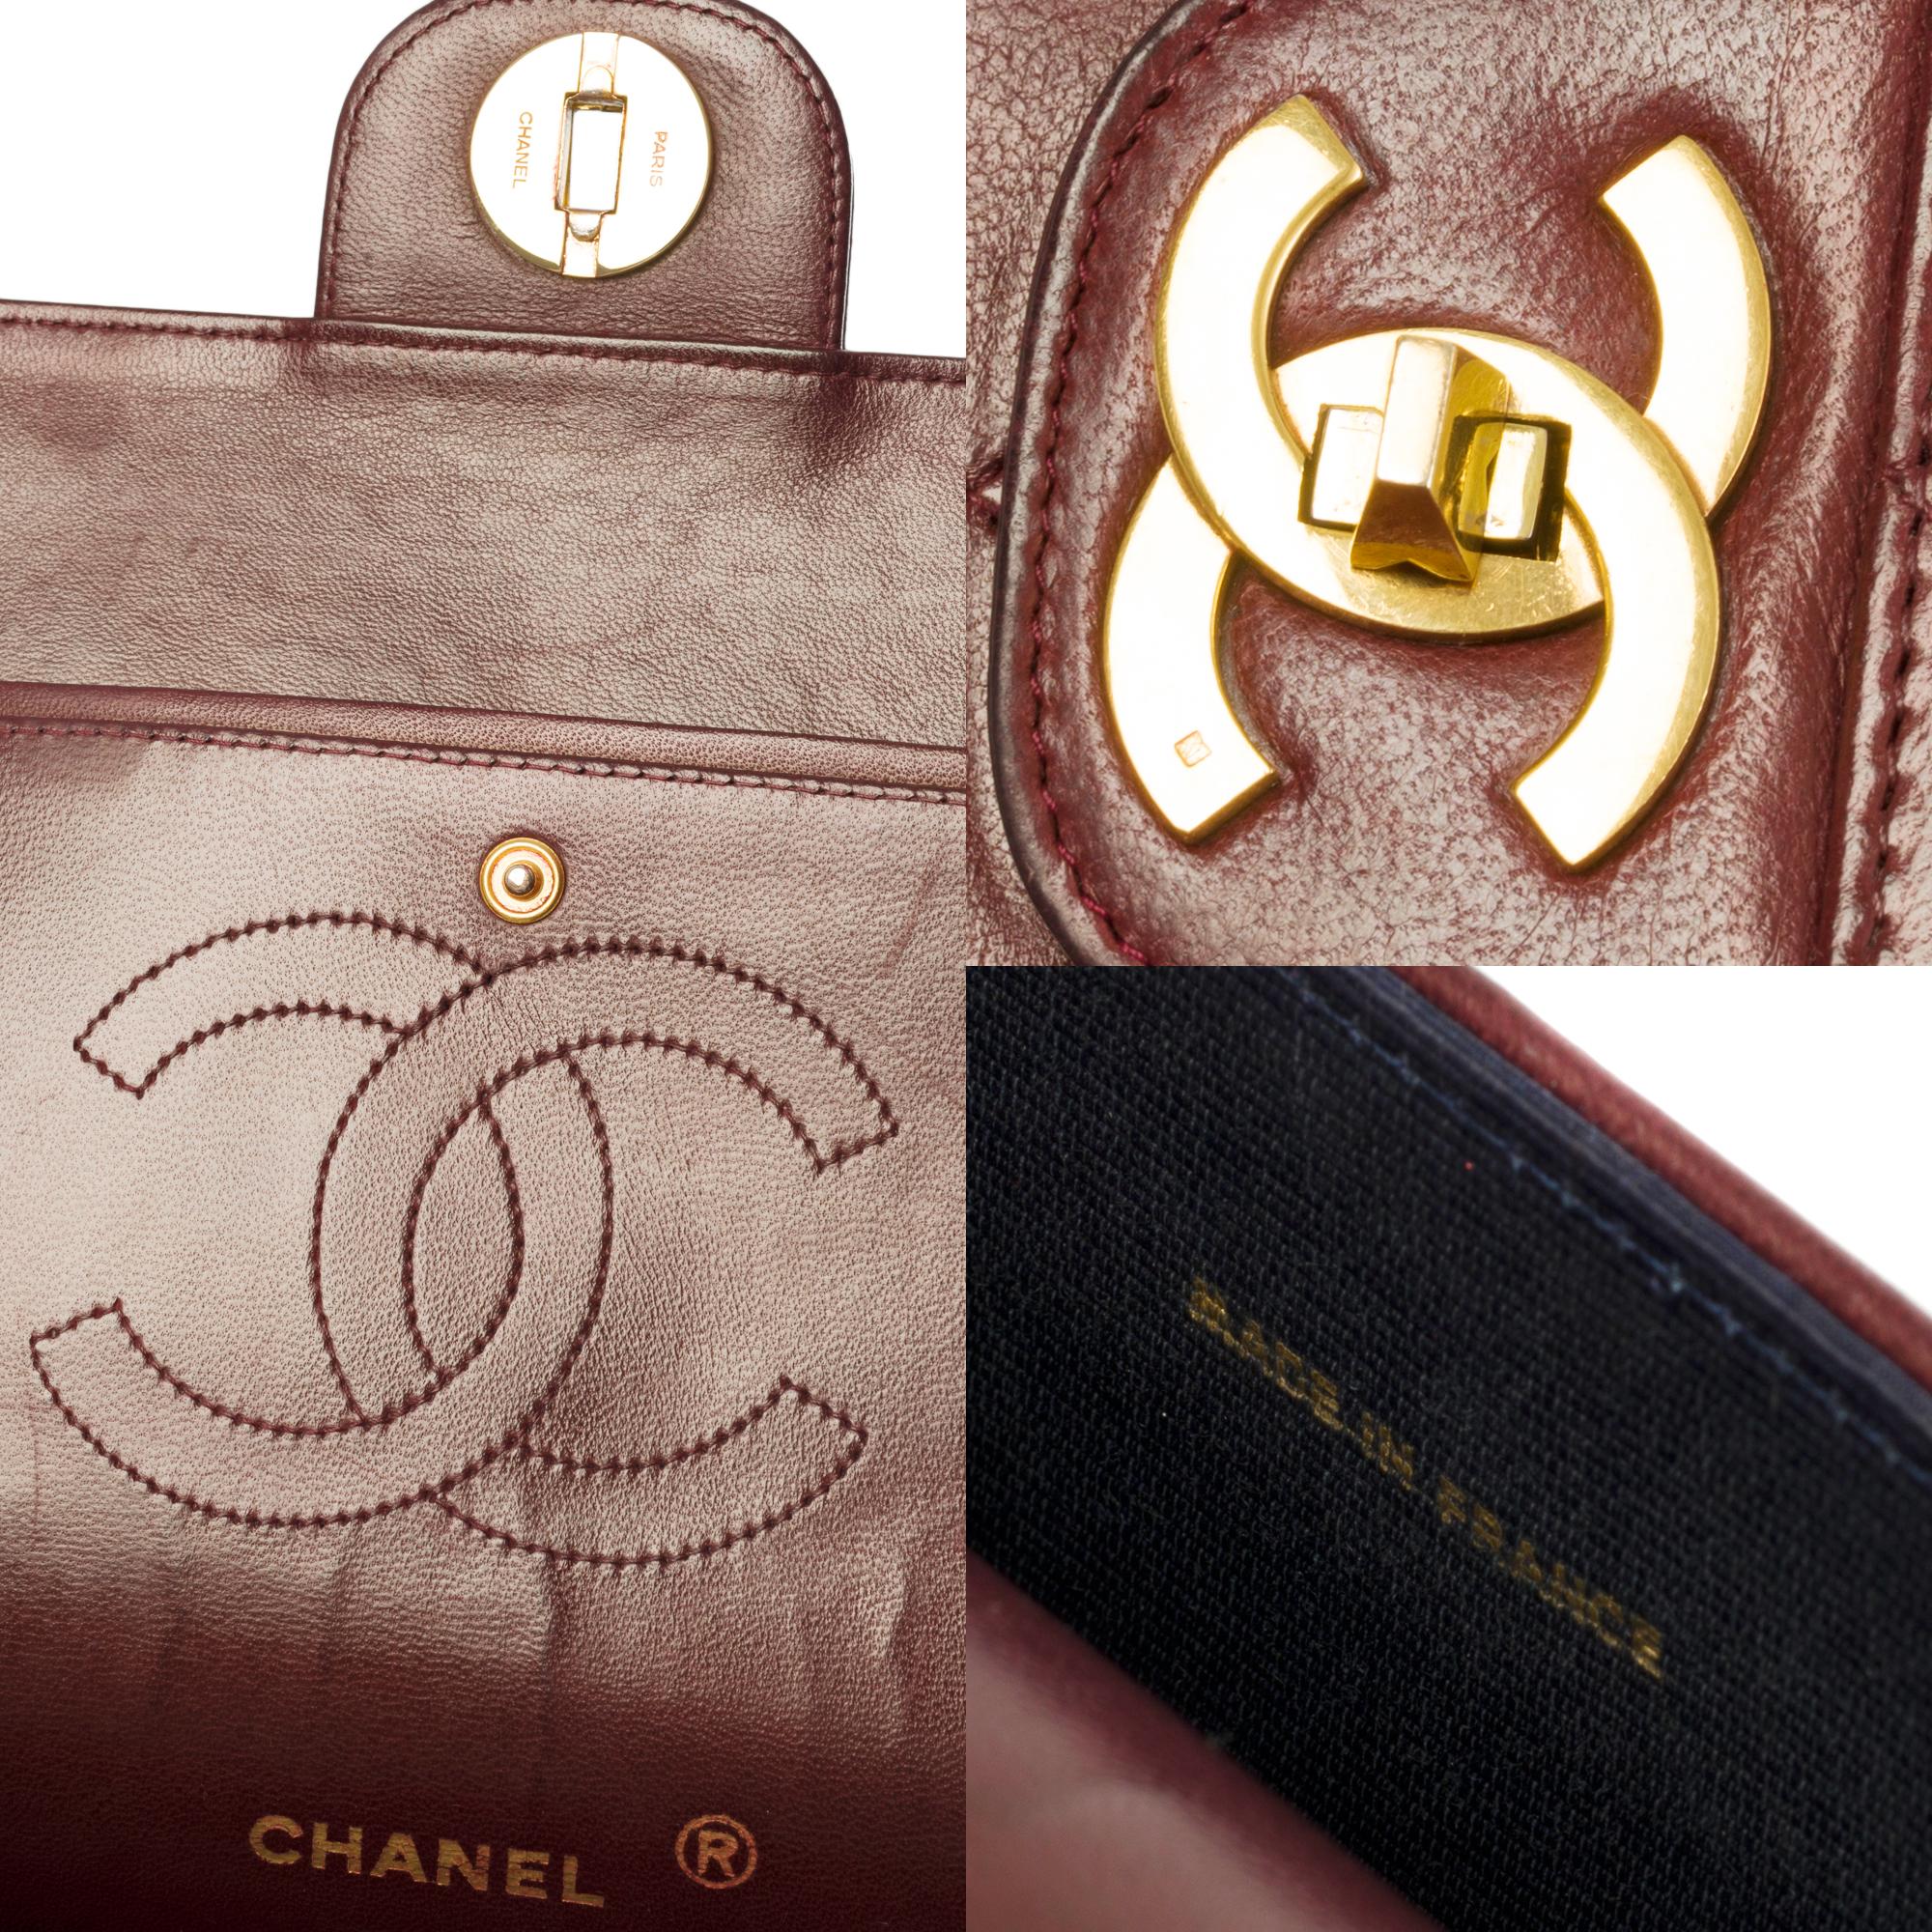 Women's Chanel Timeless shoulder bag in burgundy quilted leather with gold hardware